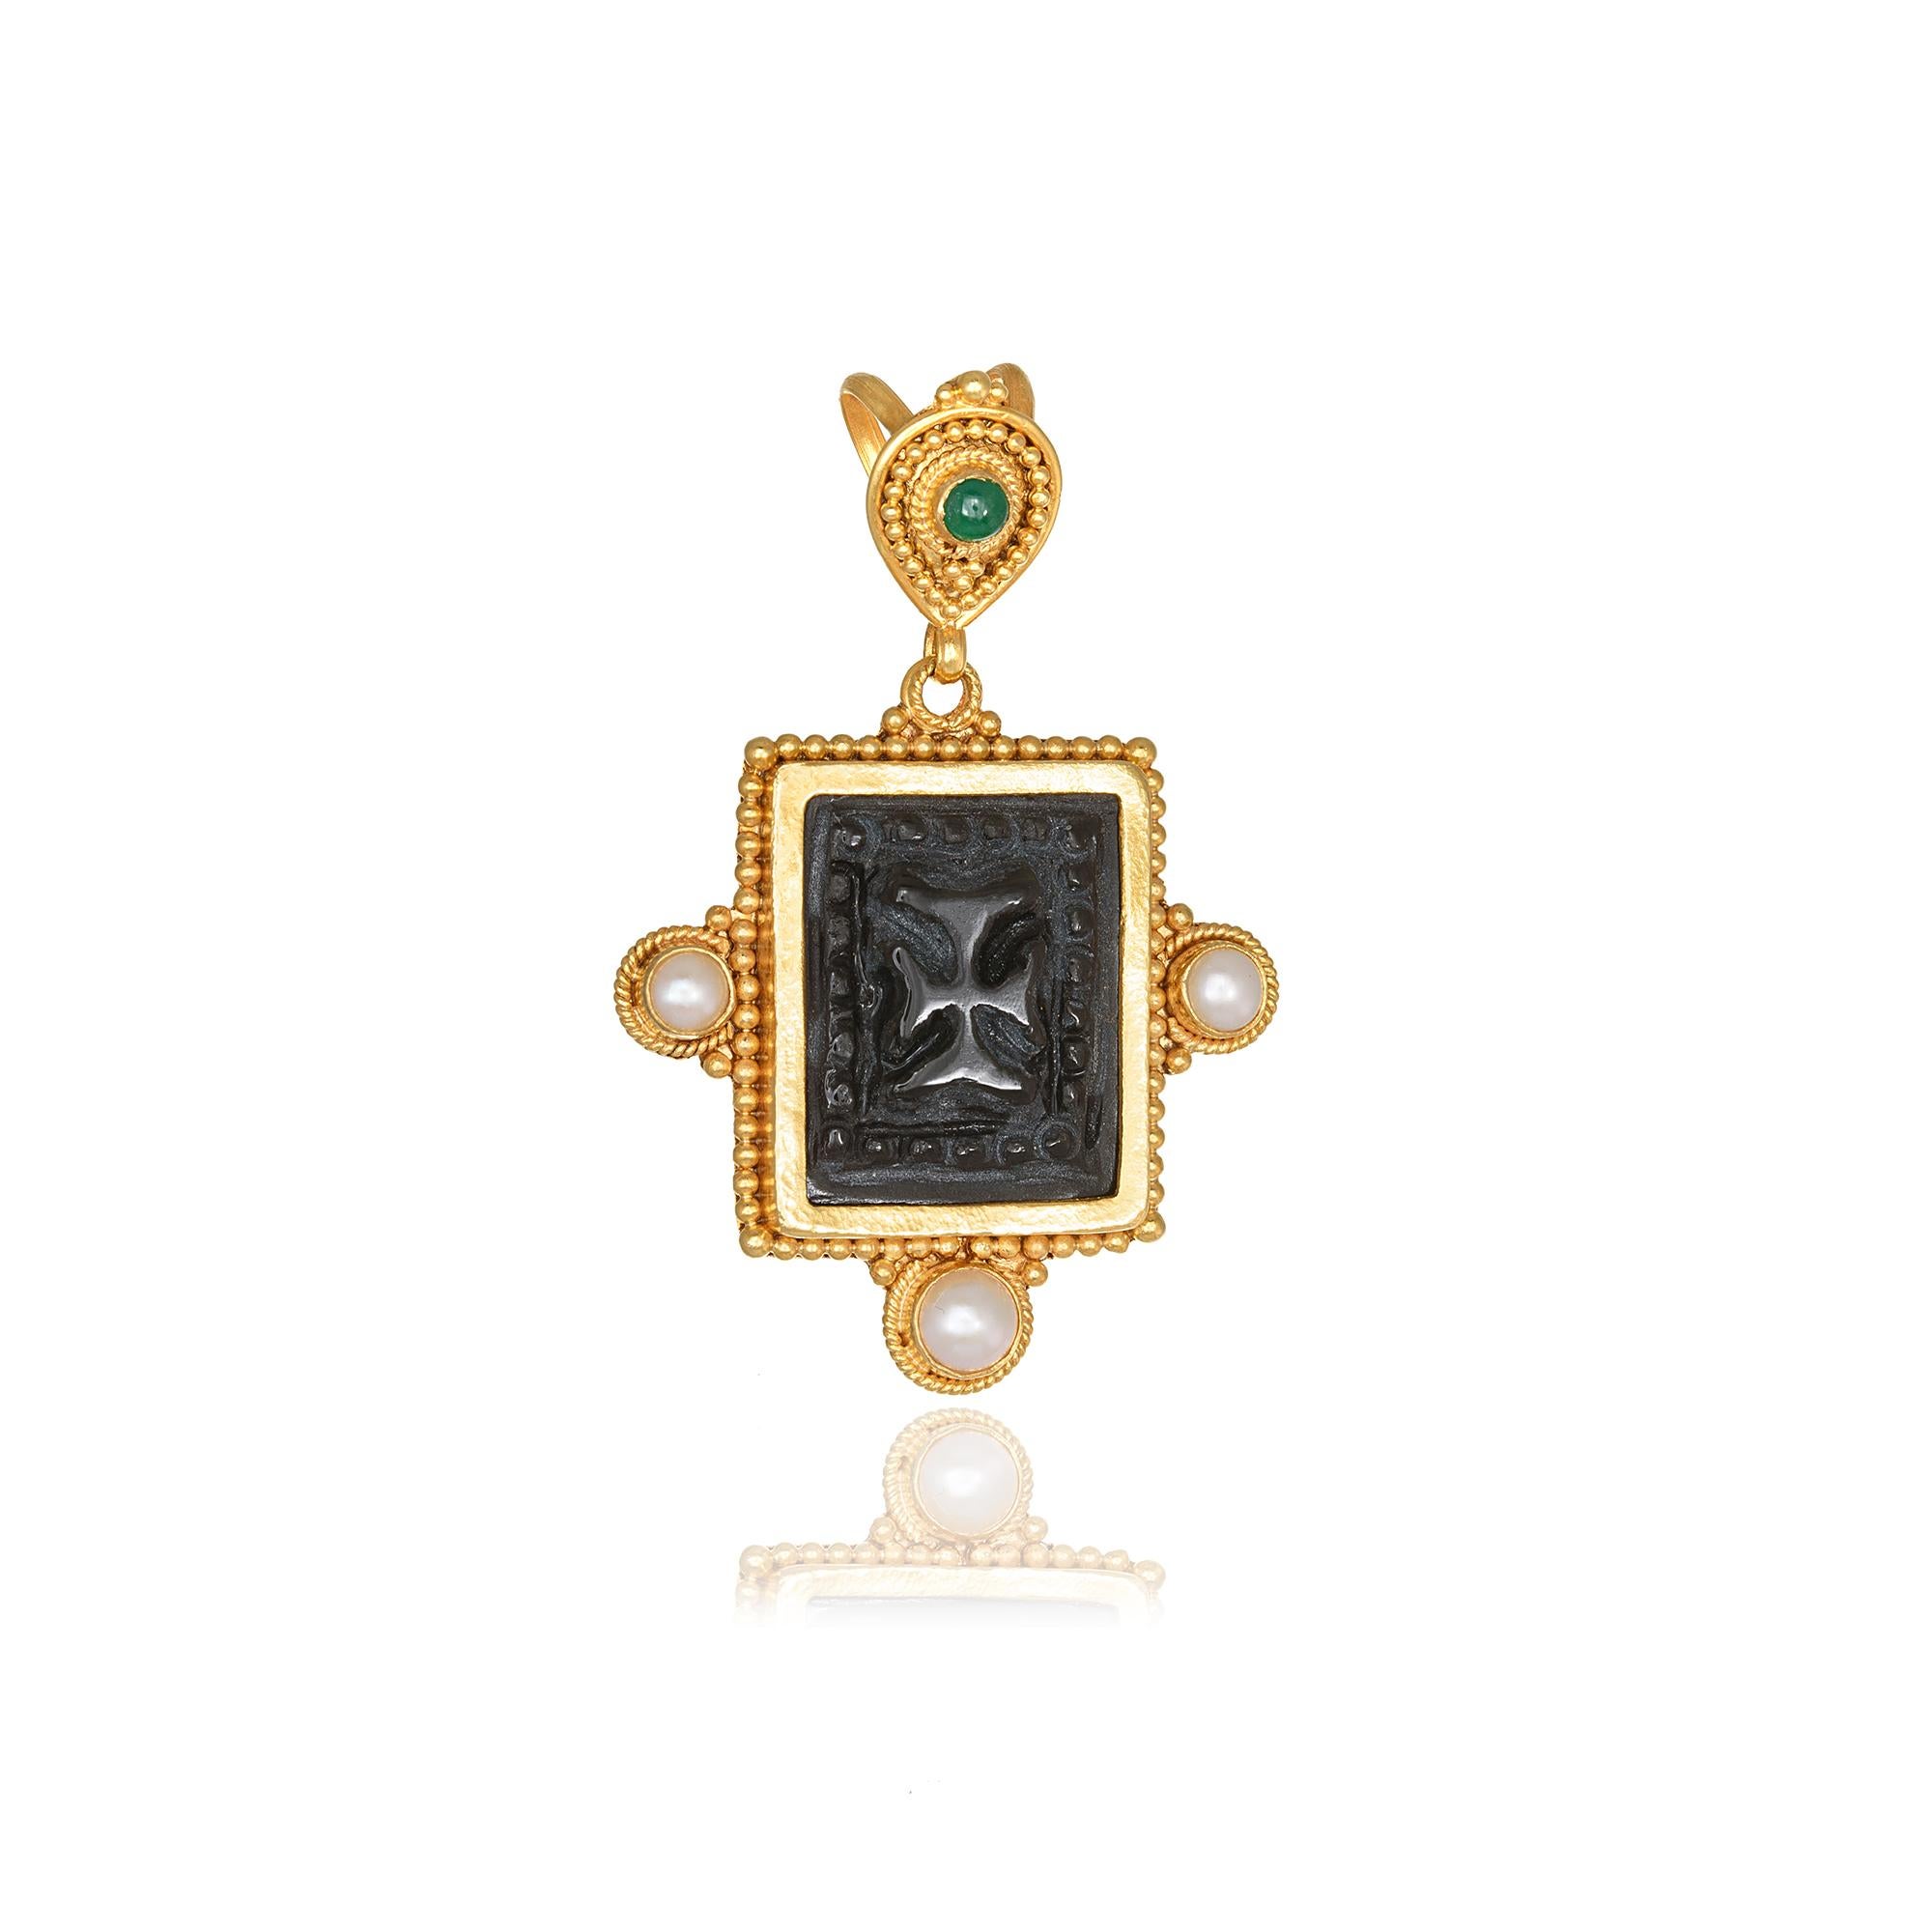 Obsidian Pendant with a hand carved byzantine cross on it, handcrafted with Granulation in 22Kt Yellow Gold, featuring three pearls and a round Emerald. This breathtaking pendant is braided using the traditional techniques of granulation and